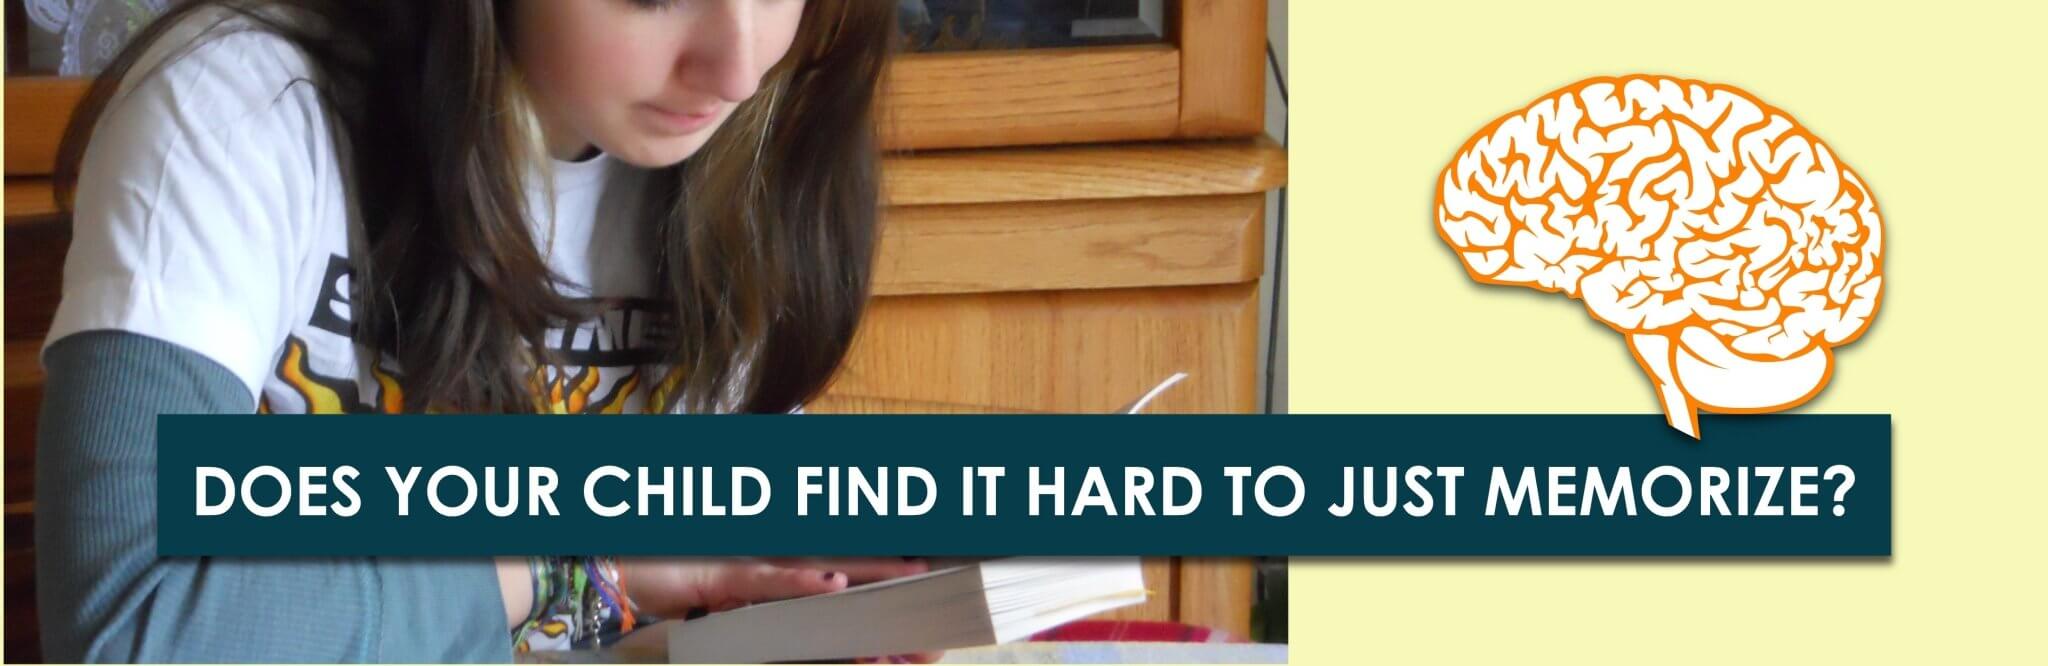 Does Your Child Find it Hard to Just Memorize?